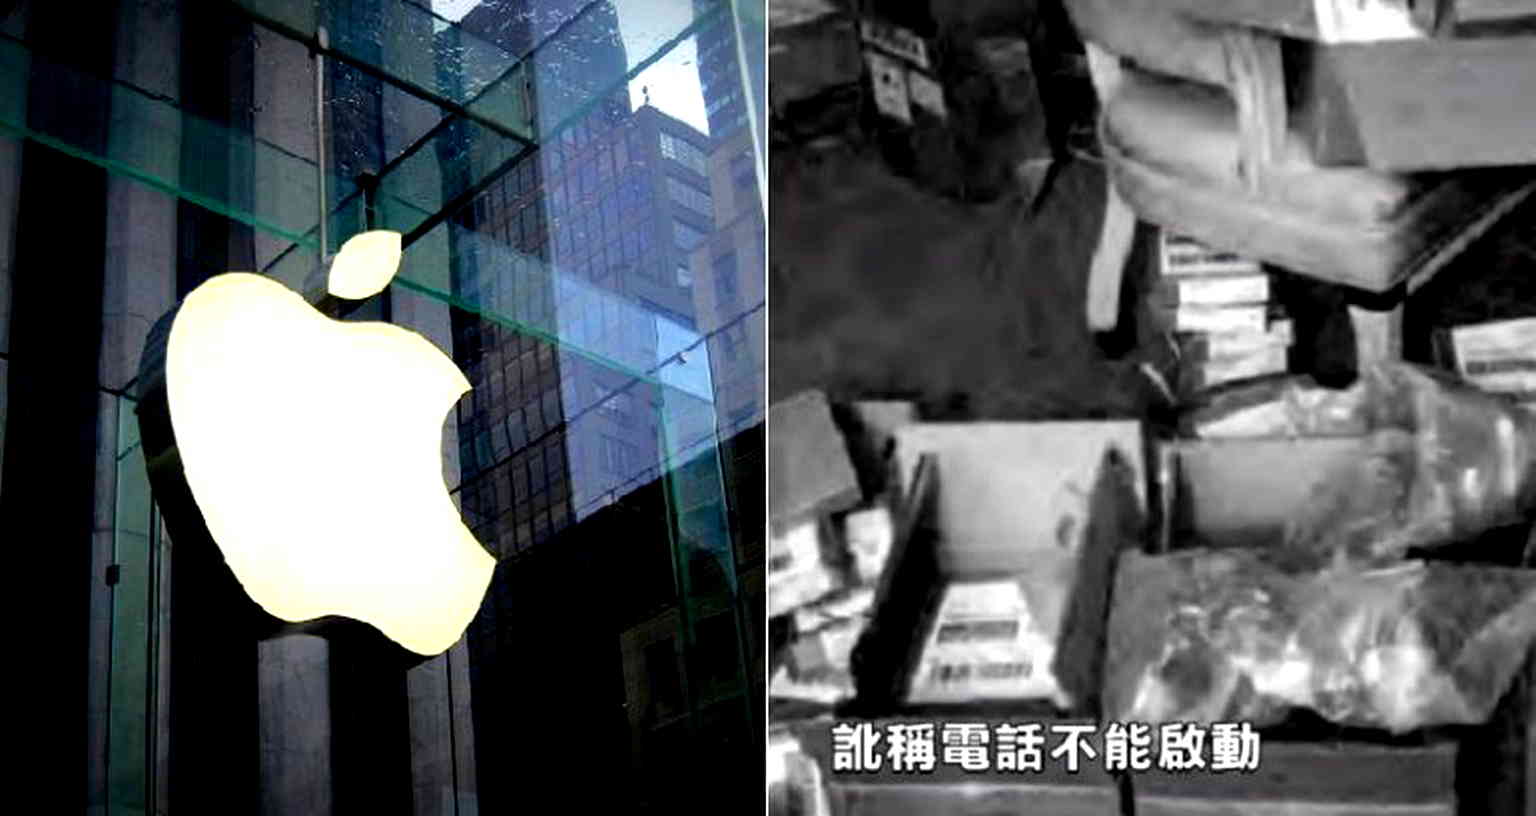 International Students Allegedly Scammed Apple Out of Almost $1 Million With Chinese ‘iPhones’